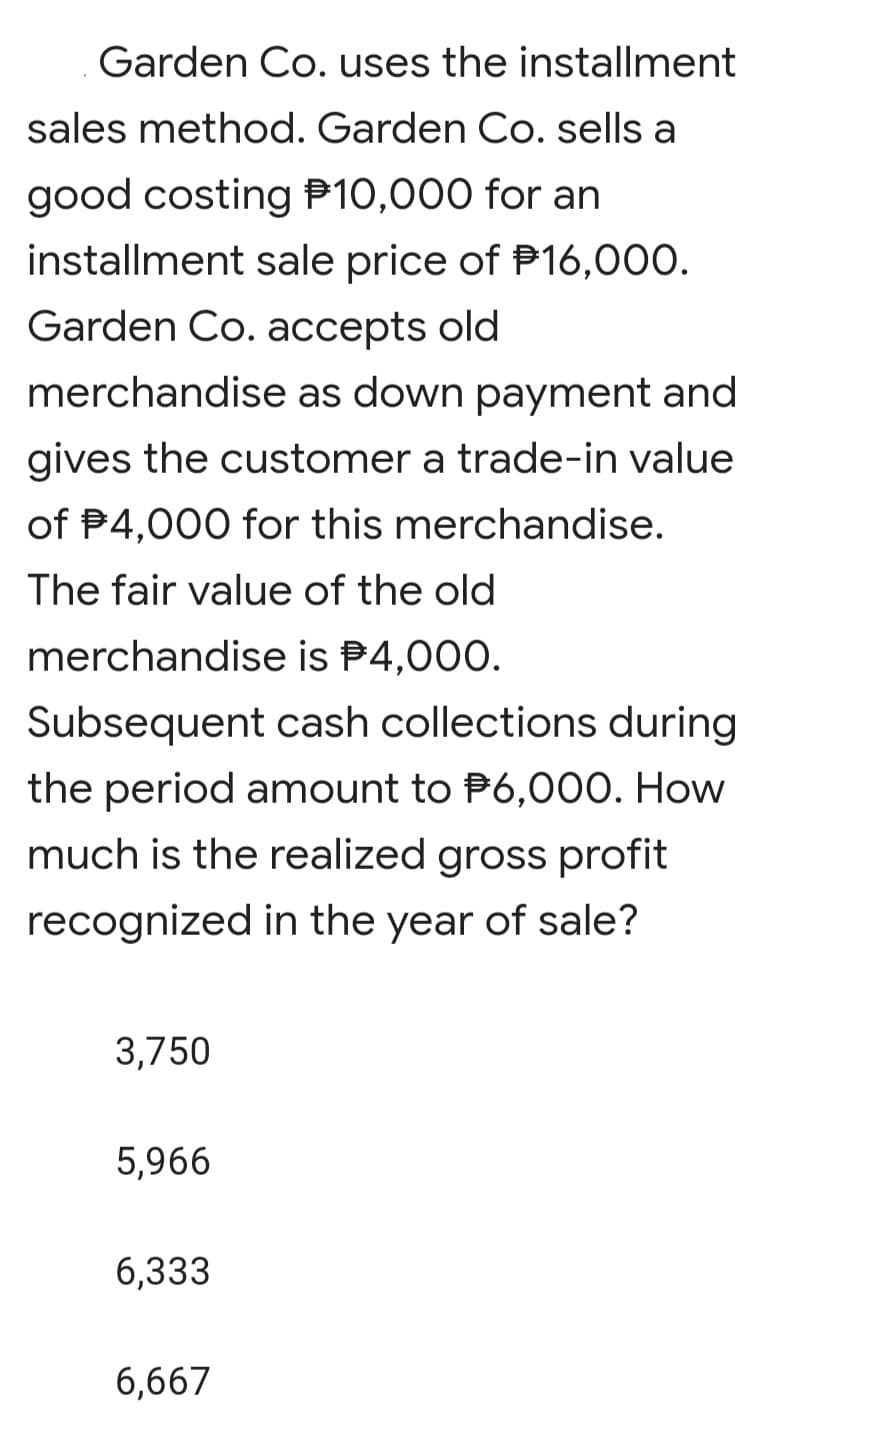 Garden Co. uses the installment
sales method. Garden Co. sells a
good costing P10,000 for an
installment sale price of P16,000.
Garden Co. accepts old
merchandise as down payment and
gives the customer a trade-in value
of P4,000 for this merchandise.
The fair value of the old
merchandise is P4,000.
Subsequent cash collections during
the period amount to P6,000. How
much is the realized gross profit
recognized in the year of sale?
3,750
5,966
6,333
6,667
